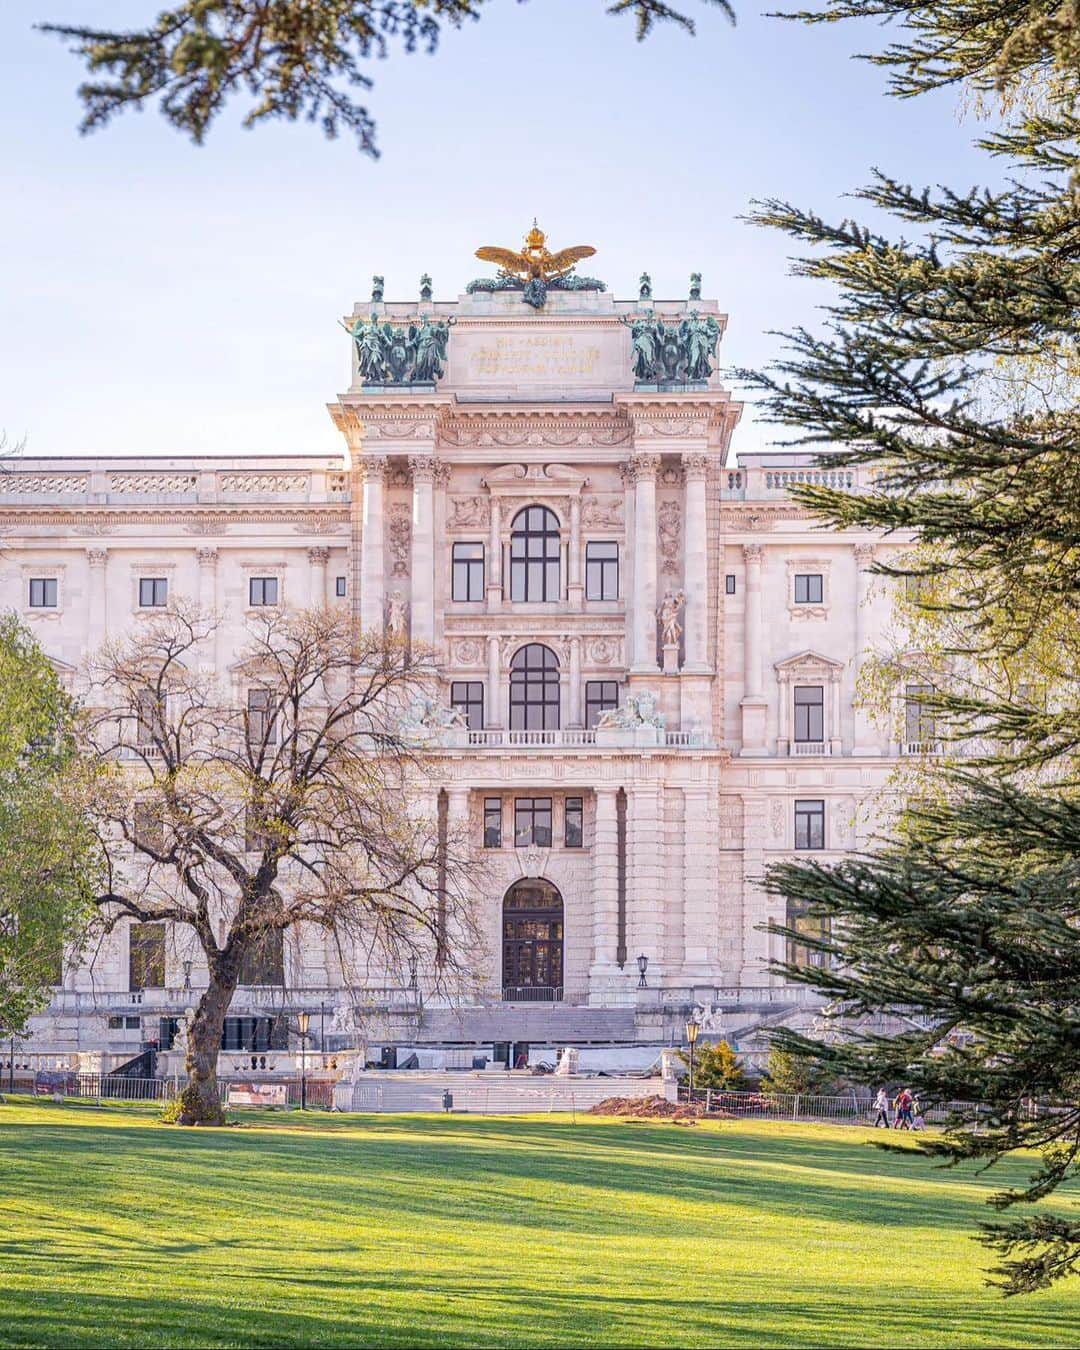 Wien | Viennaのインスタグラム：「Save this place for a good weather day in #Vienna. ☀️ The was once the private garden of Emperor Franz Joseph I., the husband of the Empress Sisi. In 1919, three years after the monarch's death, the Burggarten was opened to the public. Today it is the location of the only monument to the emperor; it was constructed here in 1957 following a private initiative. The gardens of the Imperial Palace also contain the Palm House, one of the most beautiful art nouveau glass houses, built according to plans by Friedrich Ohmann. This tropical oasis includes the Butterfly House where hundreds of exotic butterflies reside today, along with a very atmospheric coffee house and restaurant. 🌿 by @romanpixs #ViennaNow  #burggarten #garden #vienna #wien #greencity #visitvienna #wienliebe #wien #vienna_austria #vienna_city #visitvienna」